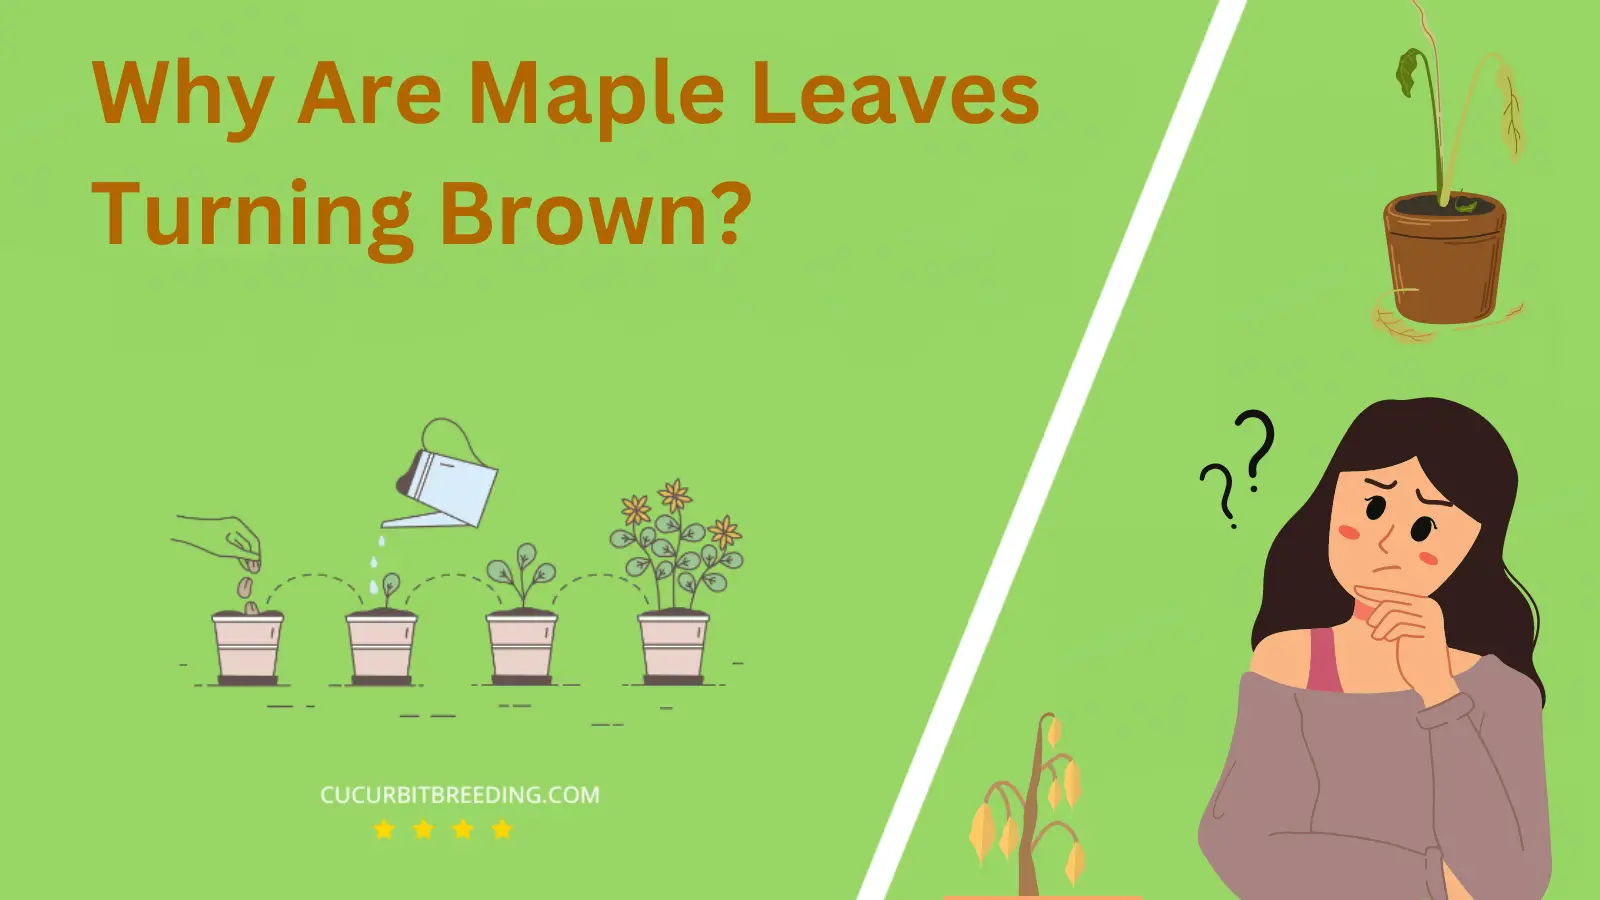 Why Are Maple Leaves Turning Brown